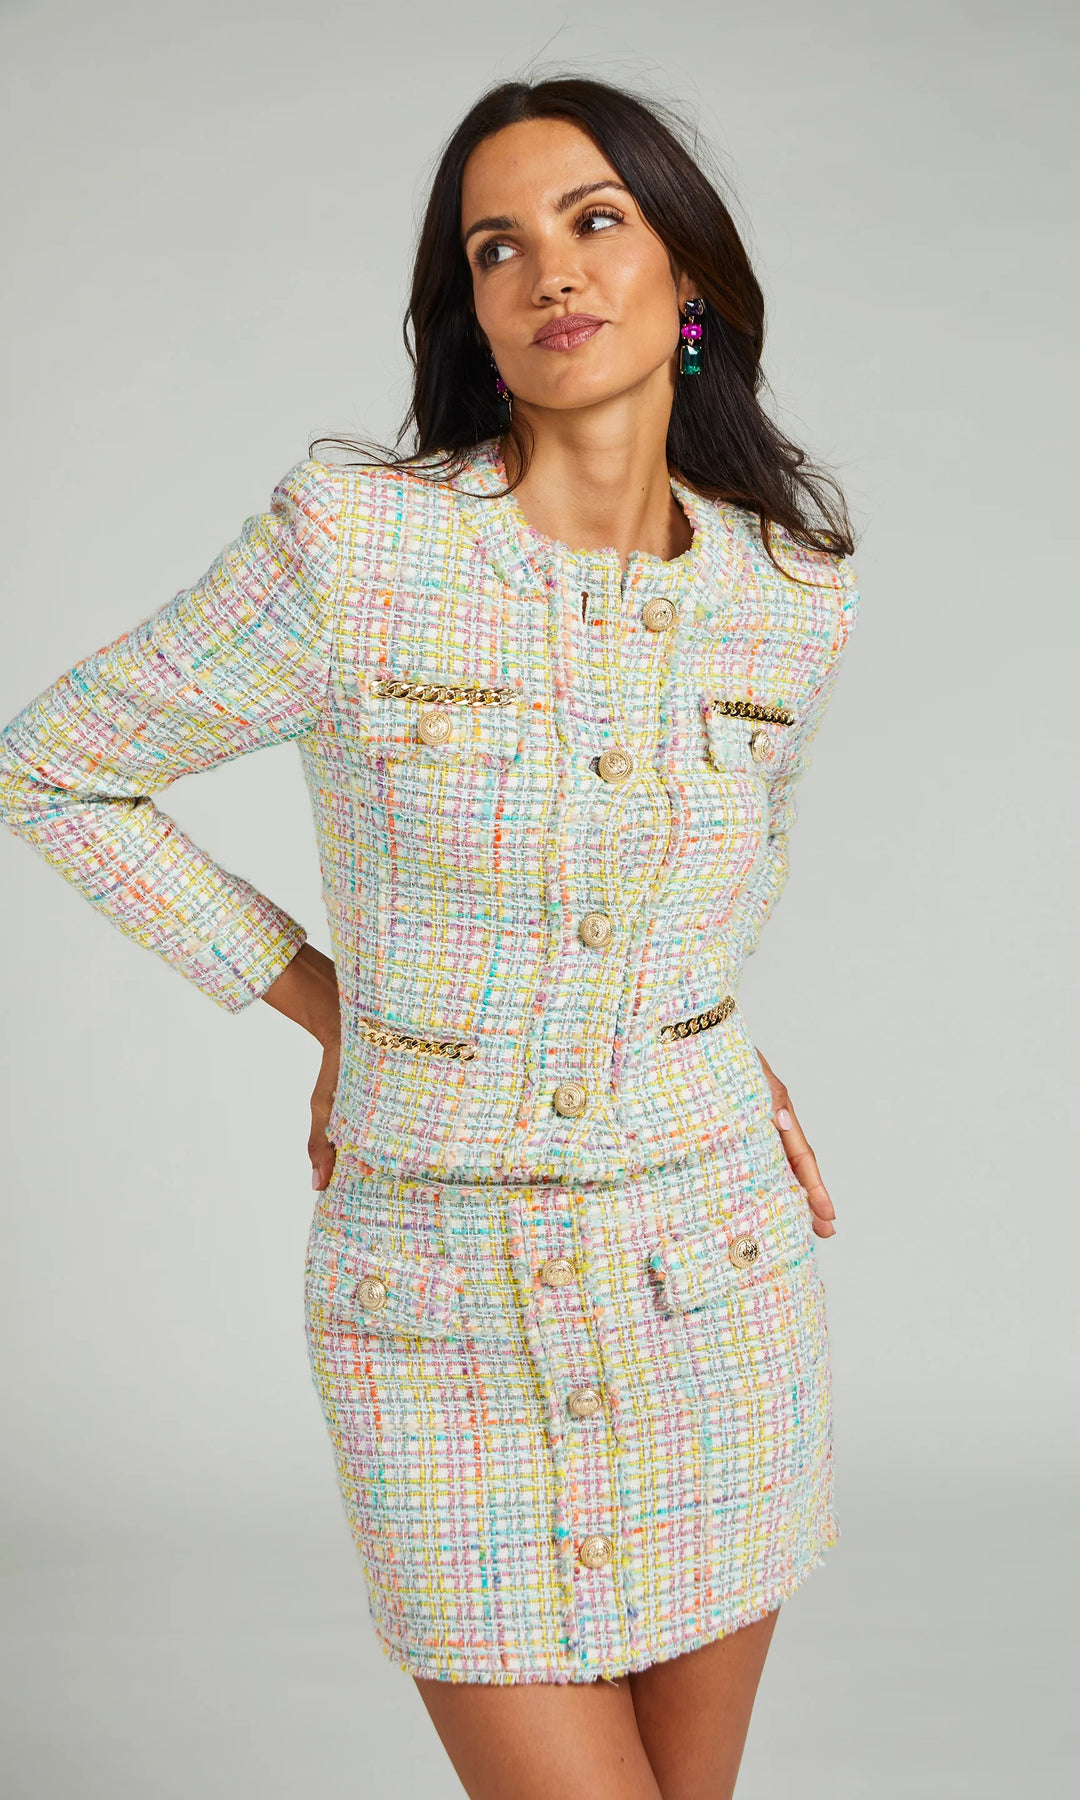 Chanel pre-owned cream sparkly tweed blazer and skirt set - size